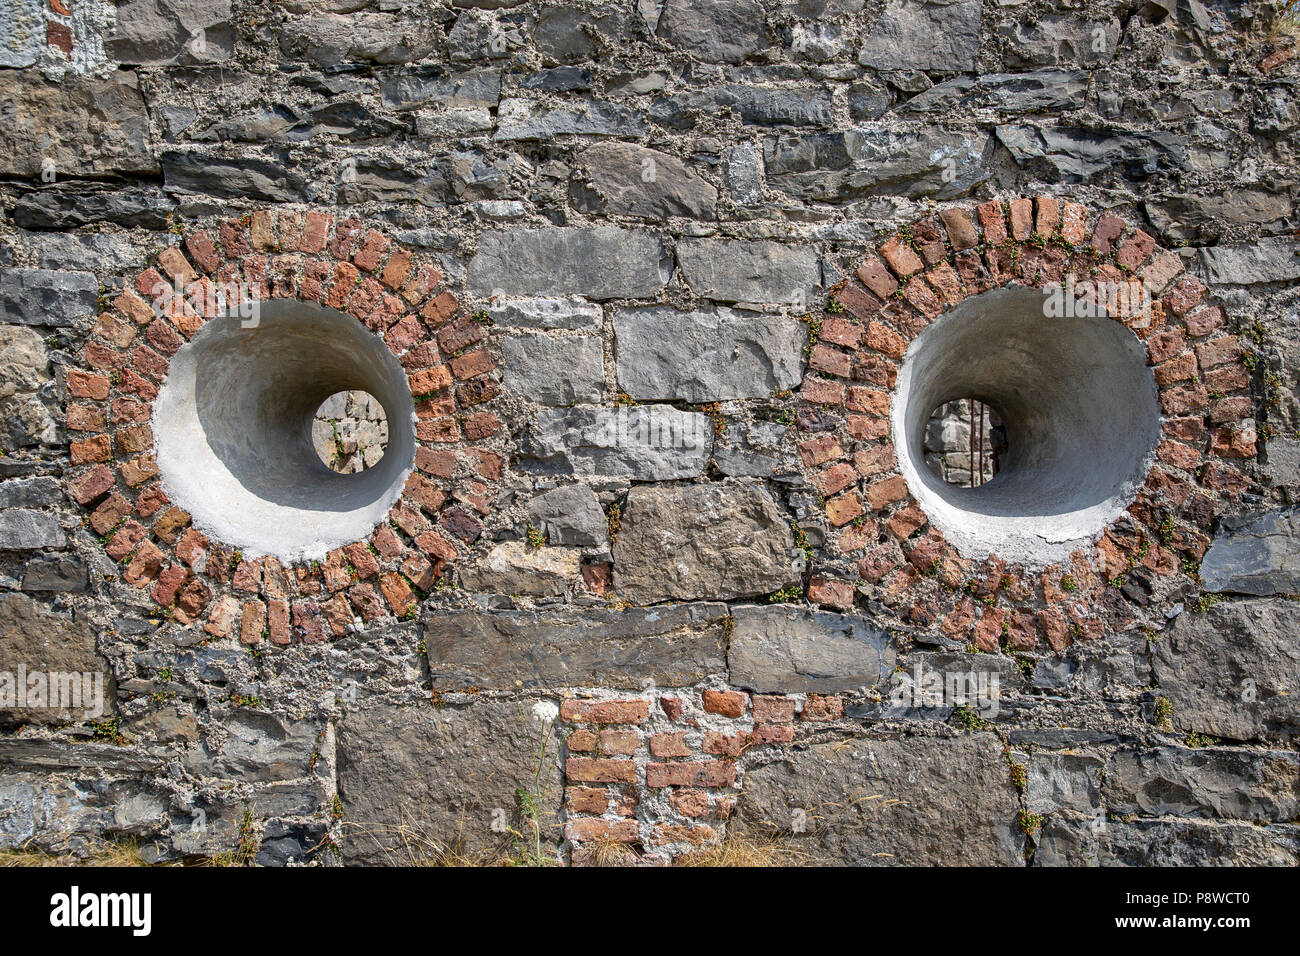 In ruins the Old Watchhouse with circle windows at the Rosses Point used by Sligo River Pilots to watch for sailing ships. Stock Photo